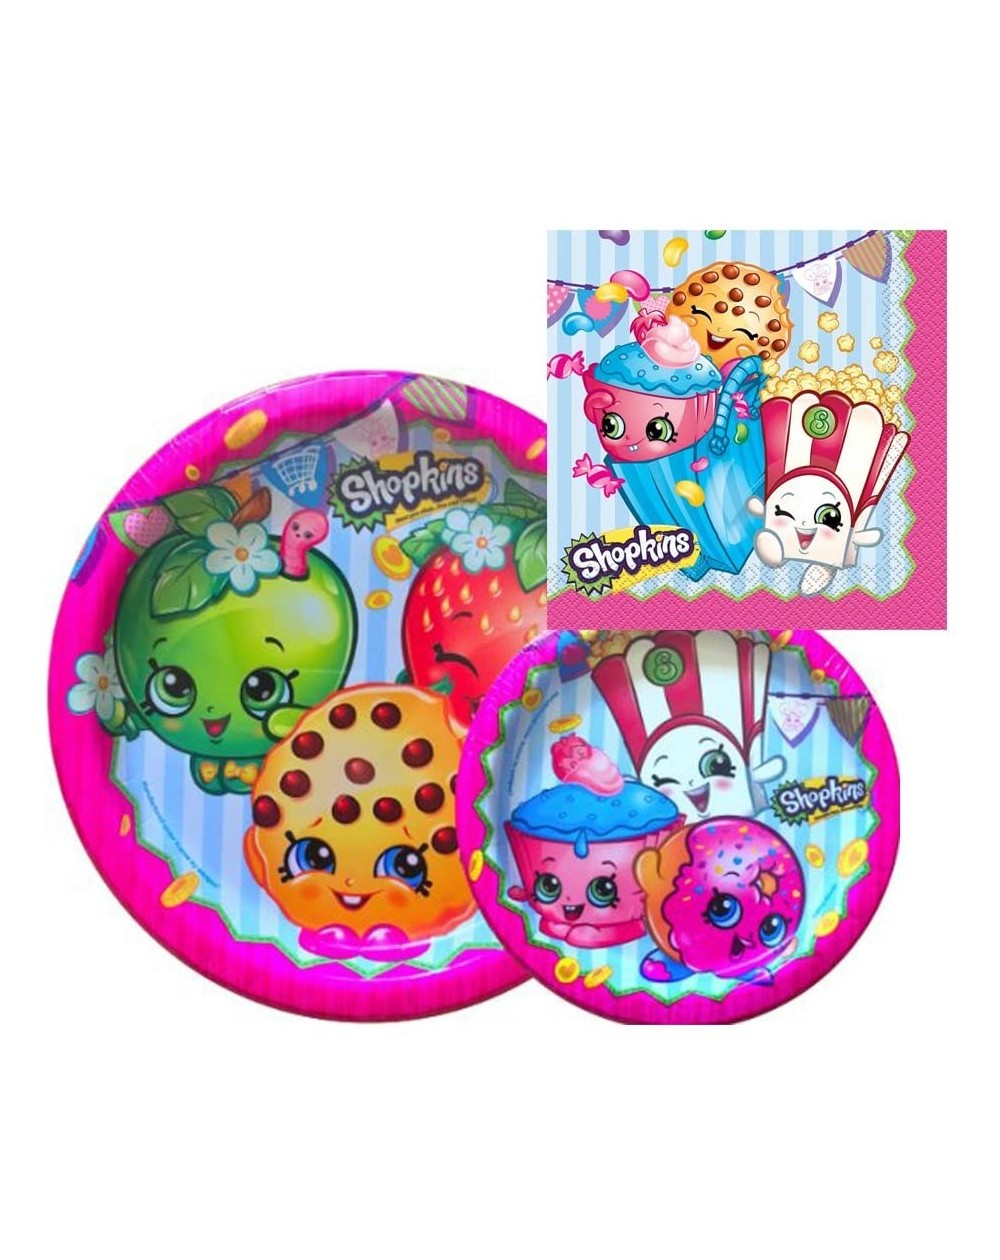 Party Tableware Birthday Party Supply Set for 16 Dinner Plates- Dessert Plate- & Napkins - CX128ETC8L9 $20.40